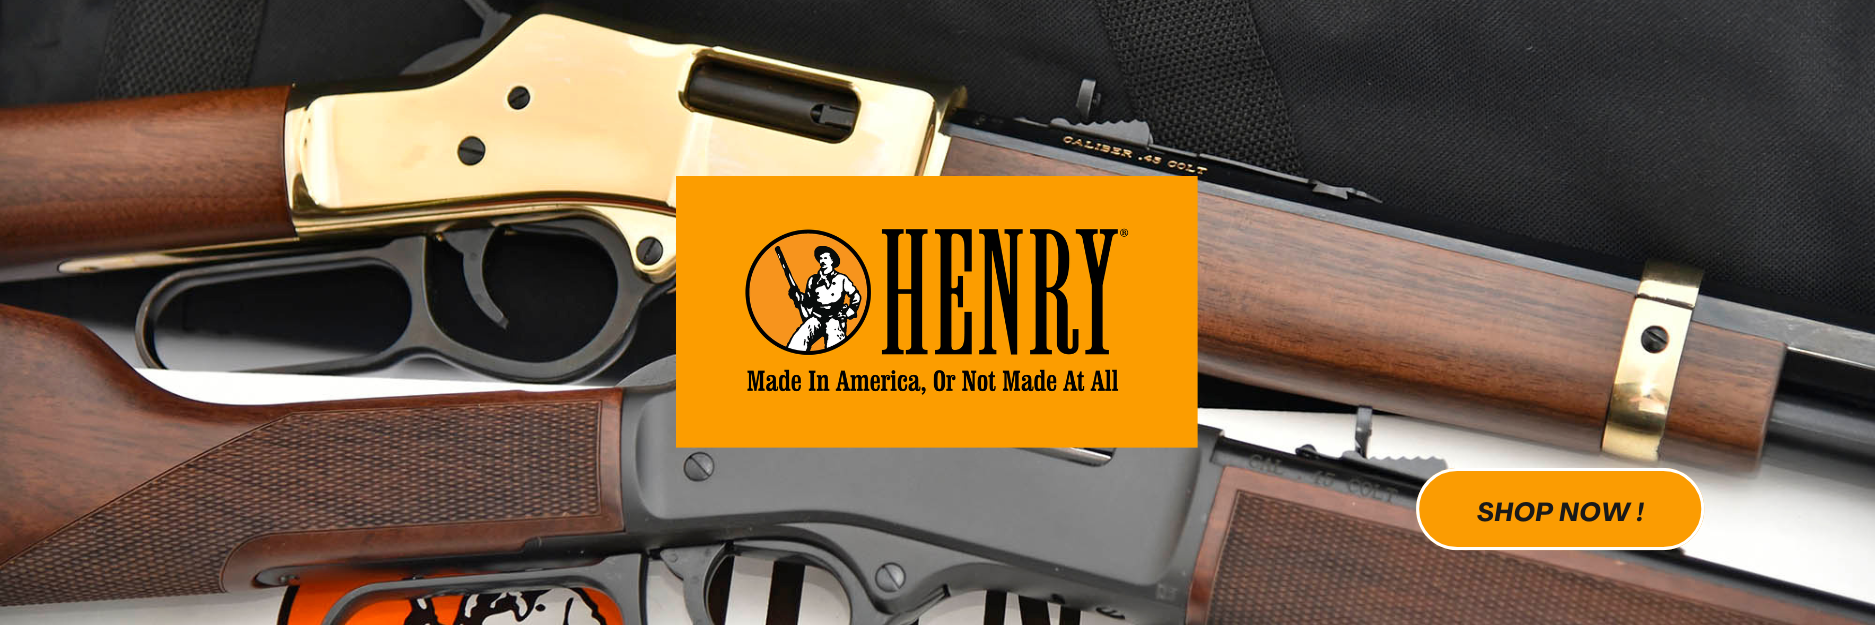 https://store.22three.com/brands/henry?sort=price-asc&select_out_of_stock=&category_id=96526%2C96538&page=1